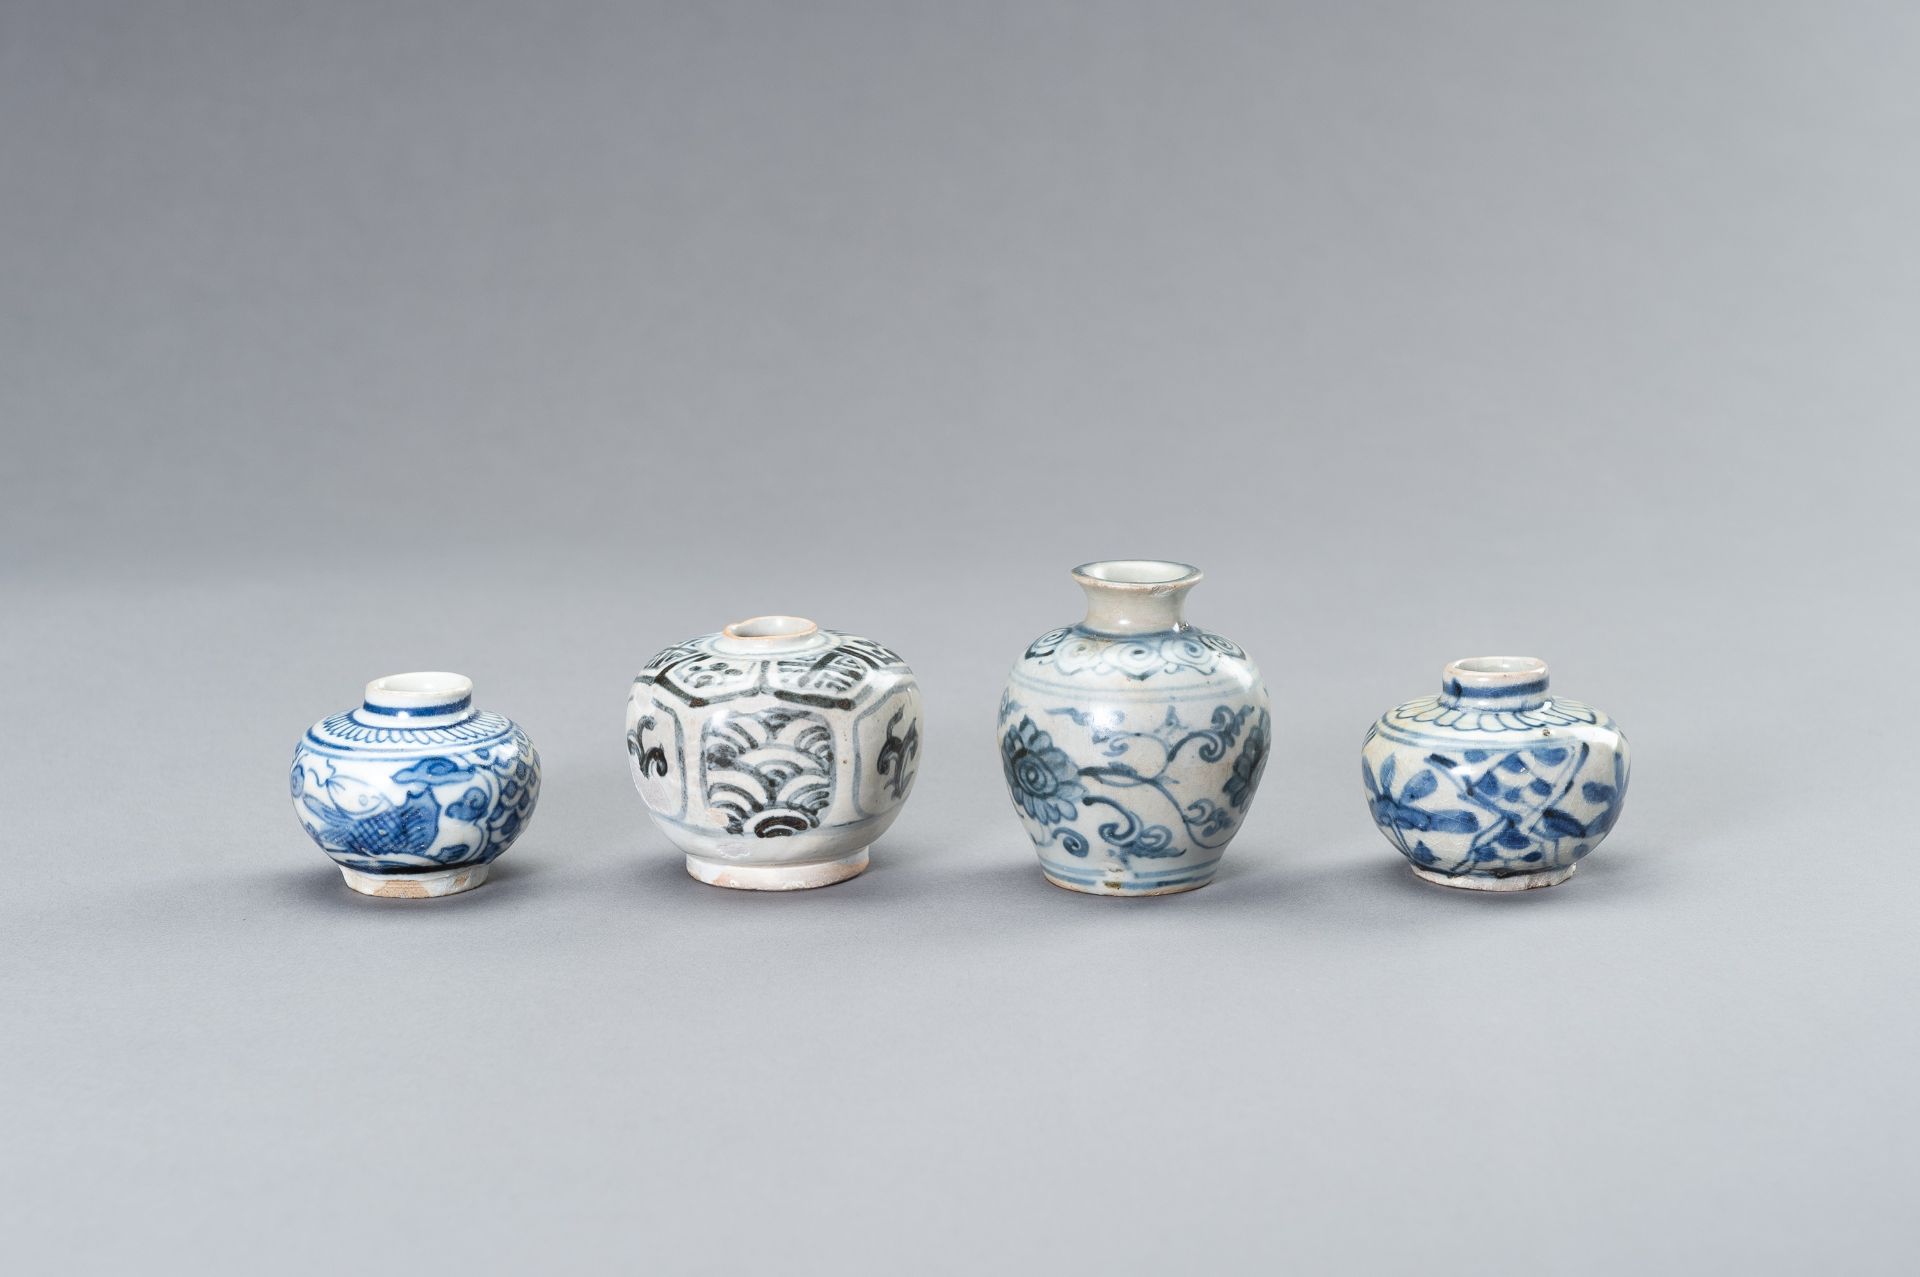 FOUR SMALL BLUE AND WHITE CERAMIC JARS - Image 5 of 8